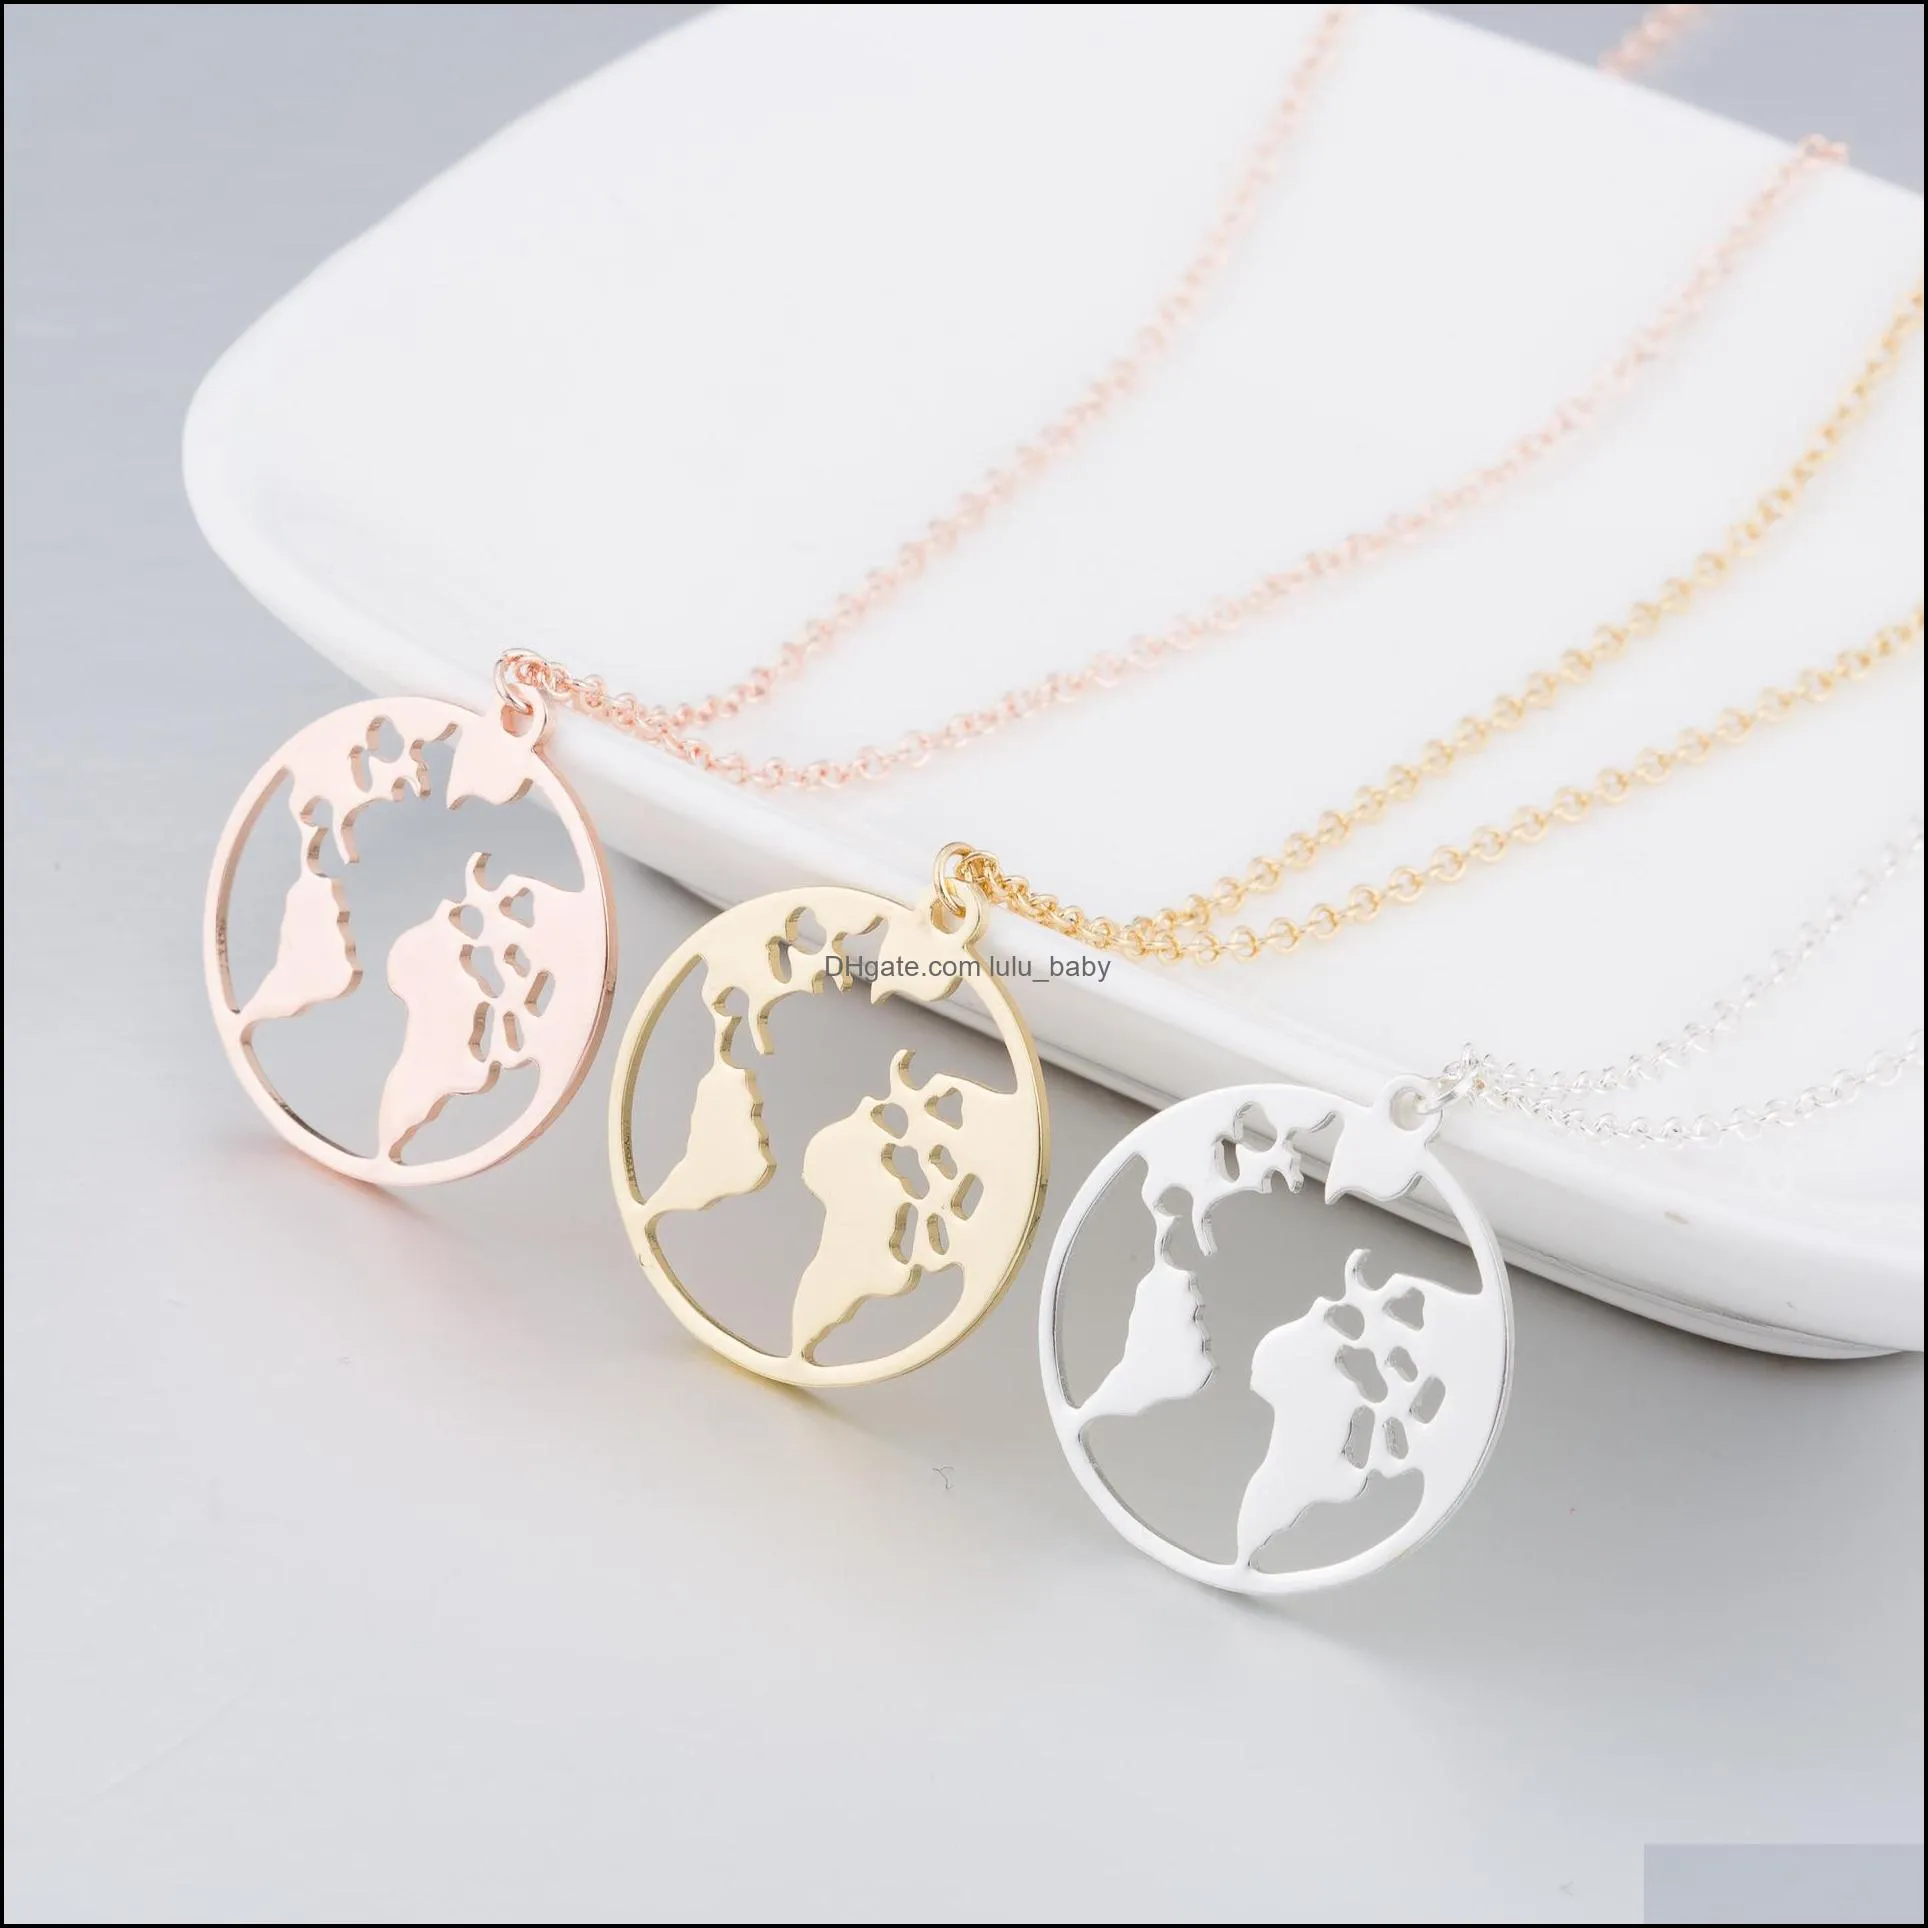  heart world map necklace stainless steel jewelry for women men gold chains necklaces silver rose gold globe travel jewelry gift